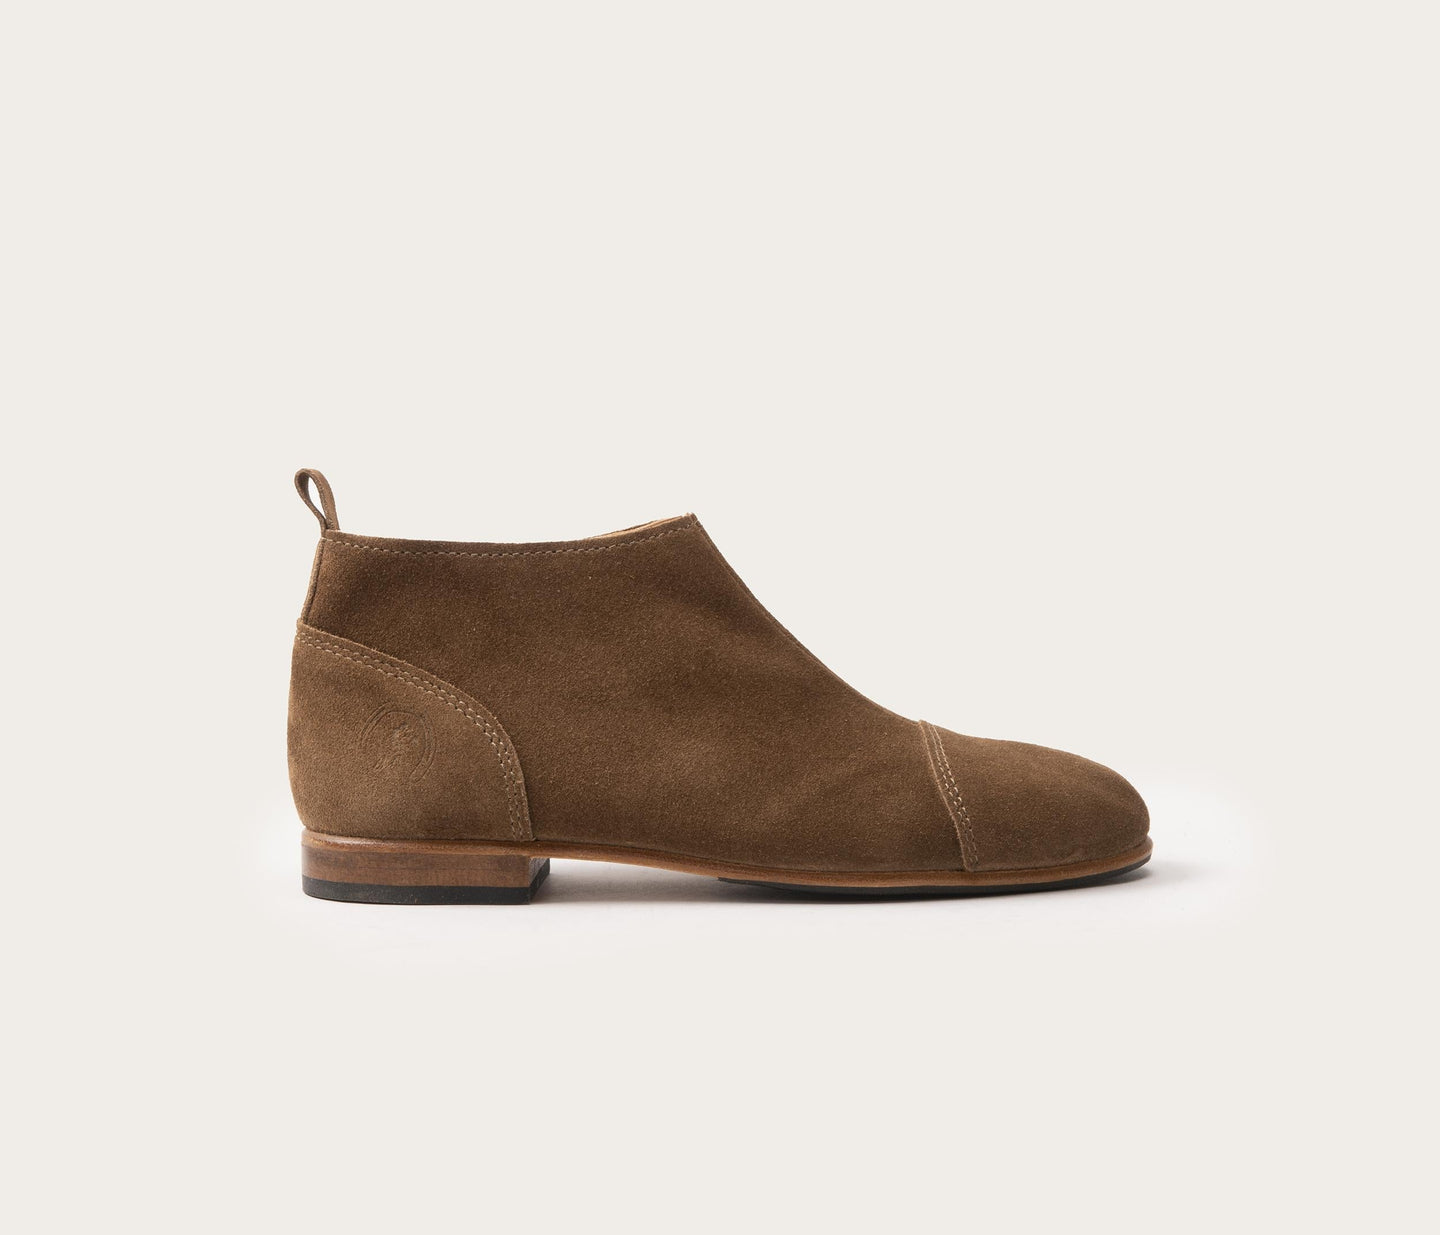 la botte gardiane, chaussure taupe, chaussure femme, made in france, chaussures à zip, chaussure zippée, chaussure basses, chaussure en daim taupe, label epv, grandes pointures femme